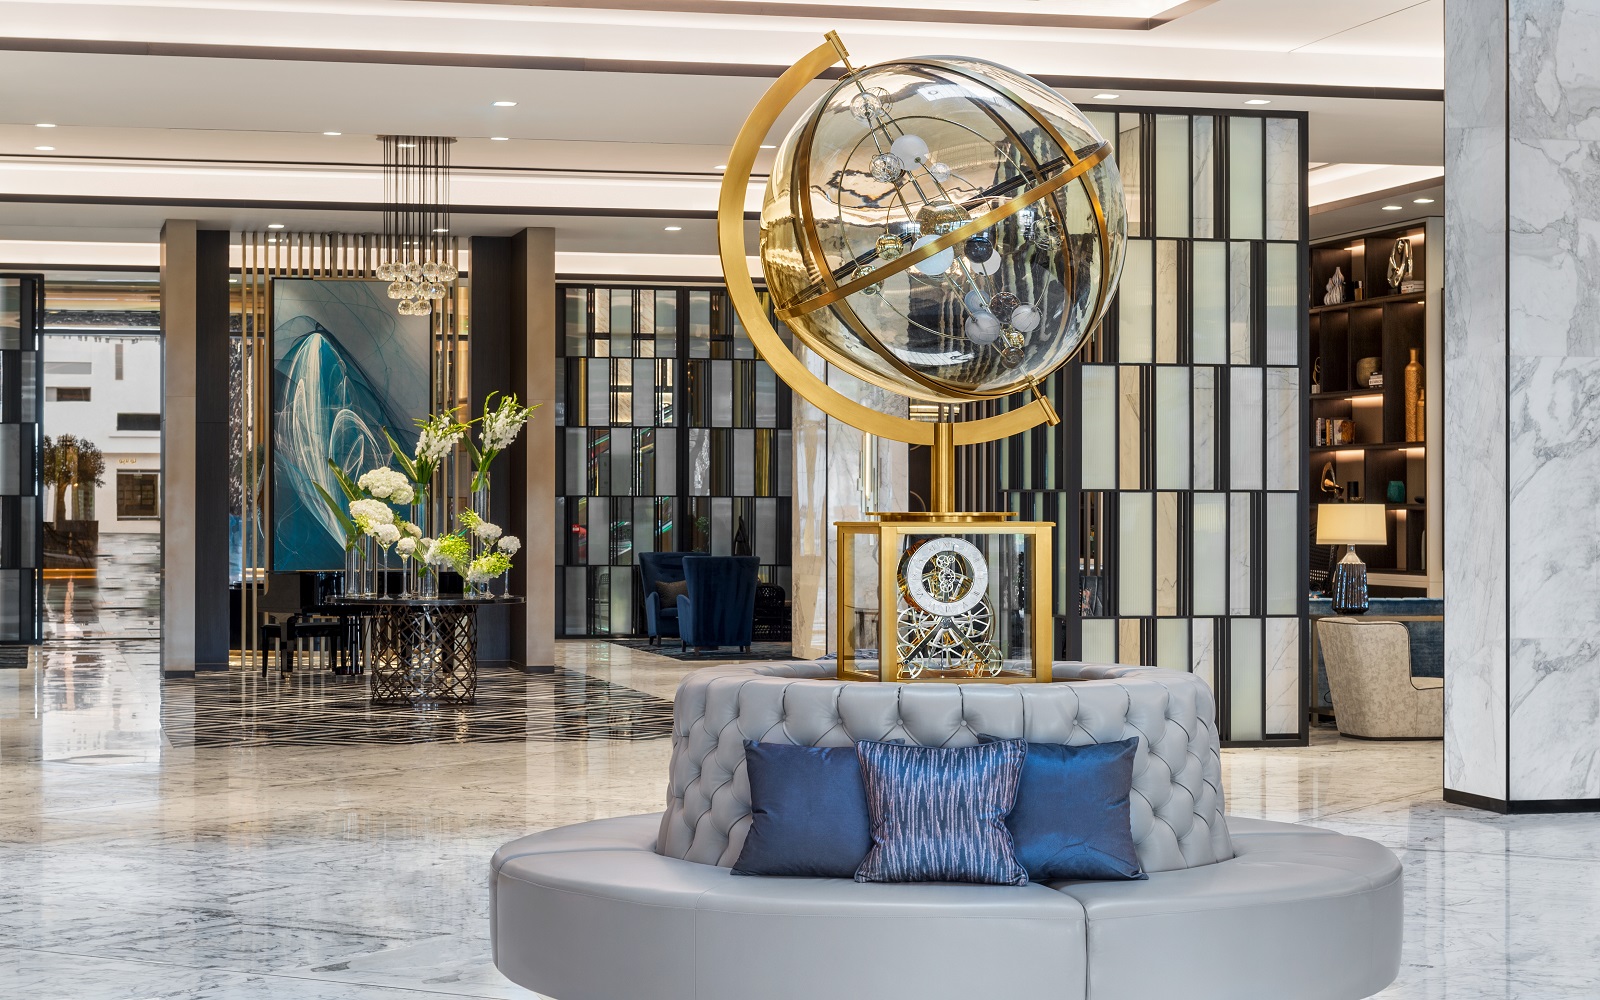 Waldorf Astoria Kuwait lobby with central sculptural clock feature